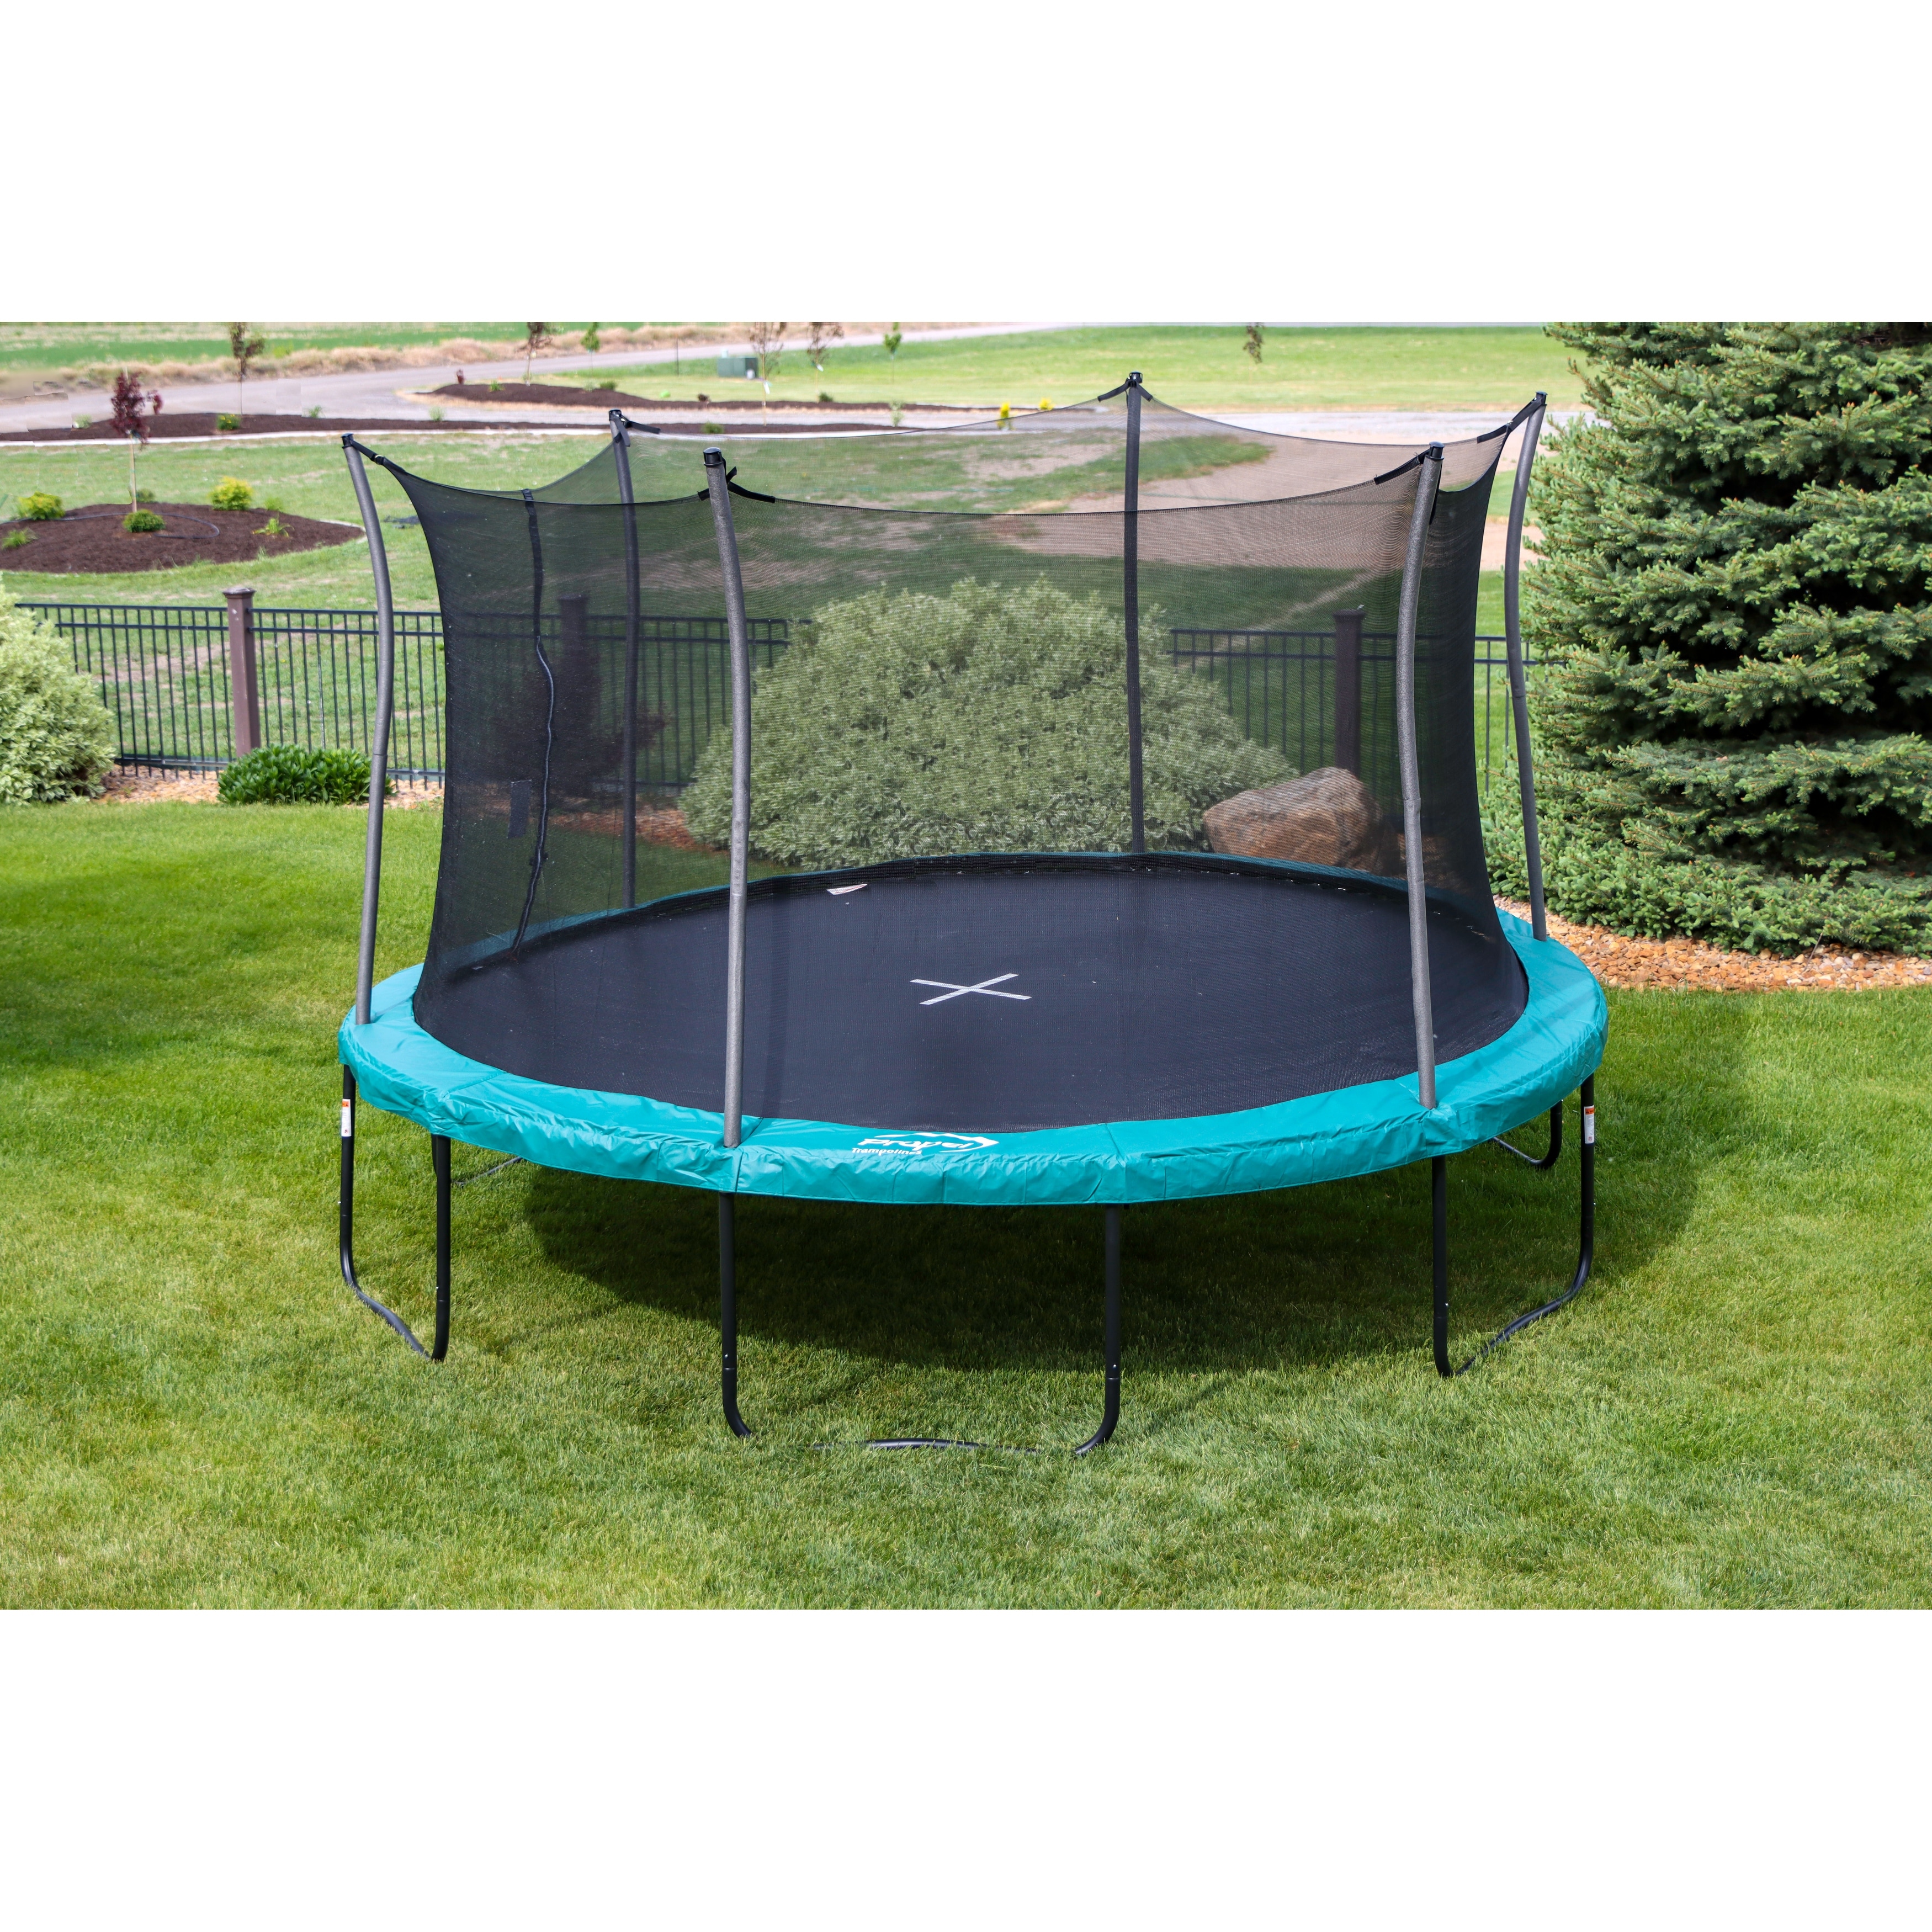 Propel 14undefined Trampoline with Safety Enclosure and Basketball Hoop - On Bed Bath & Beyond - 33490208